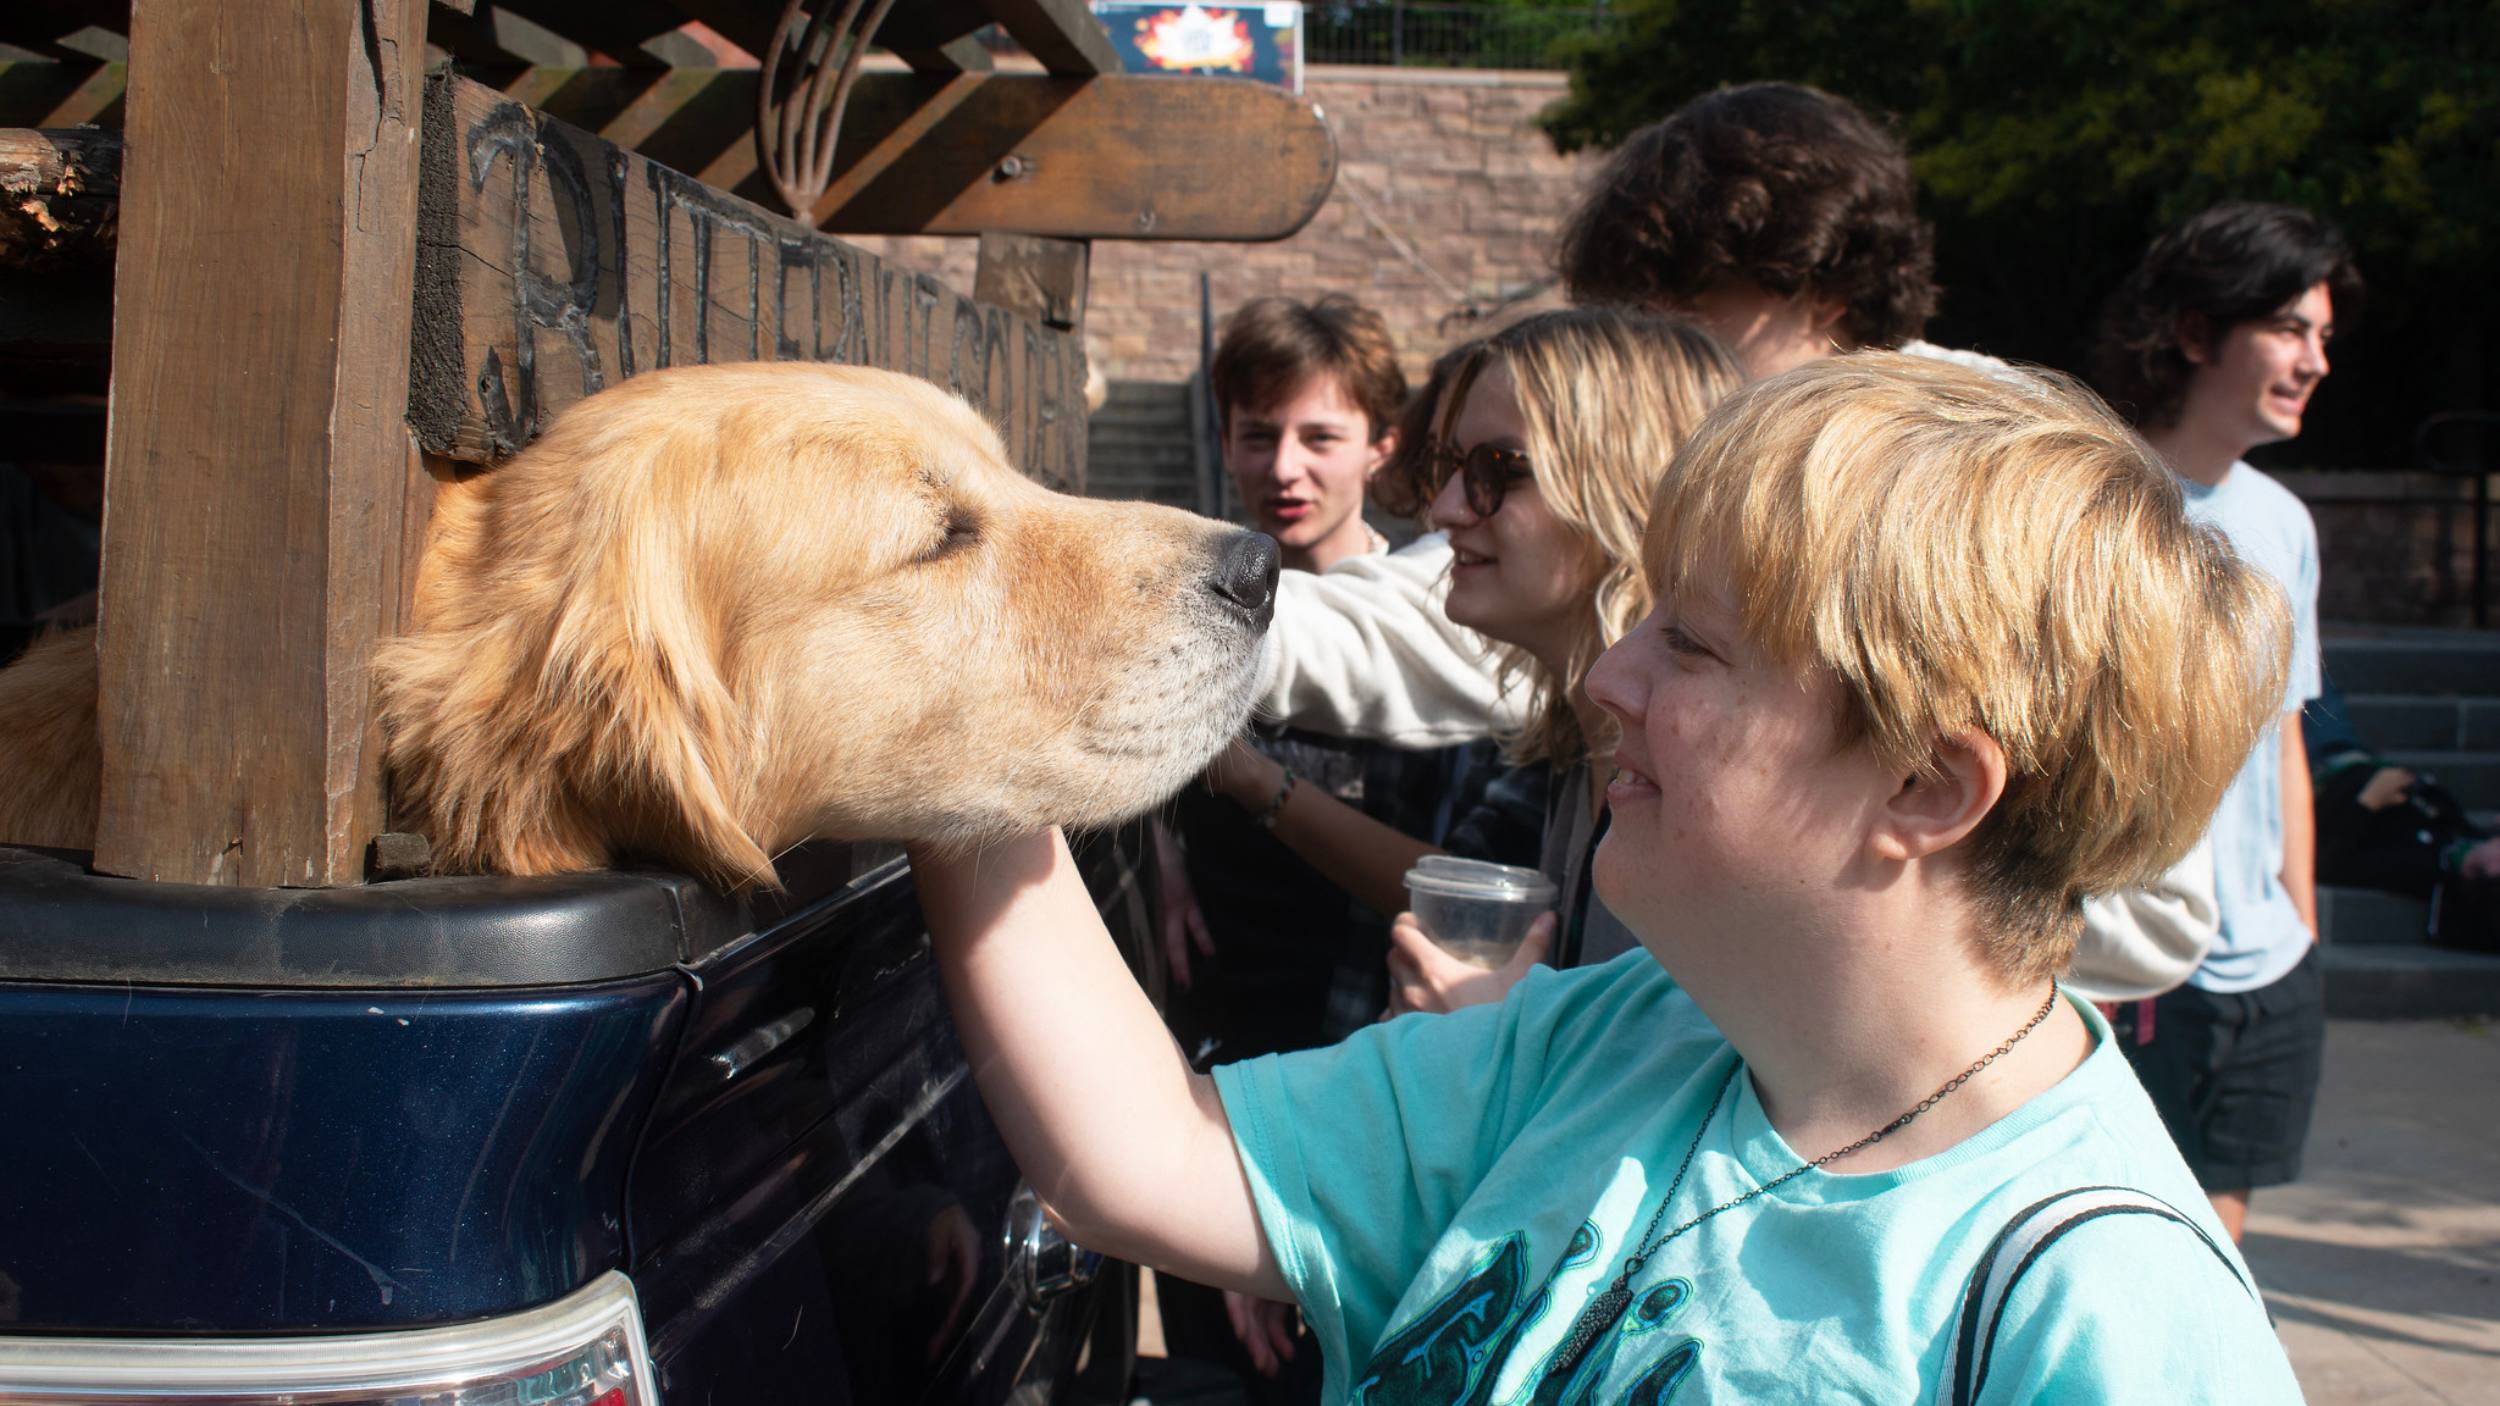 students petting dogs in wellbeing truck on campus